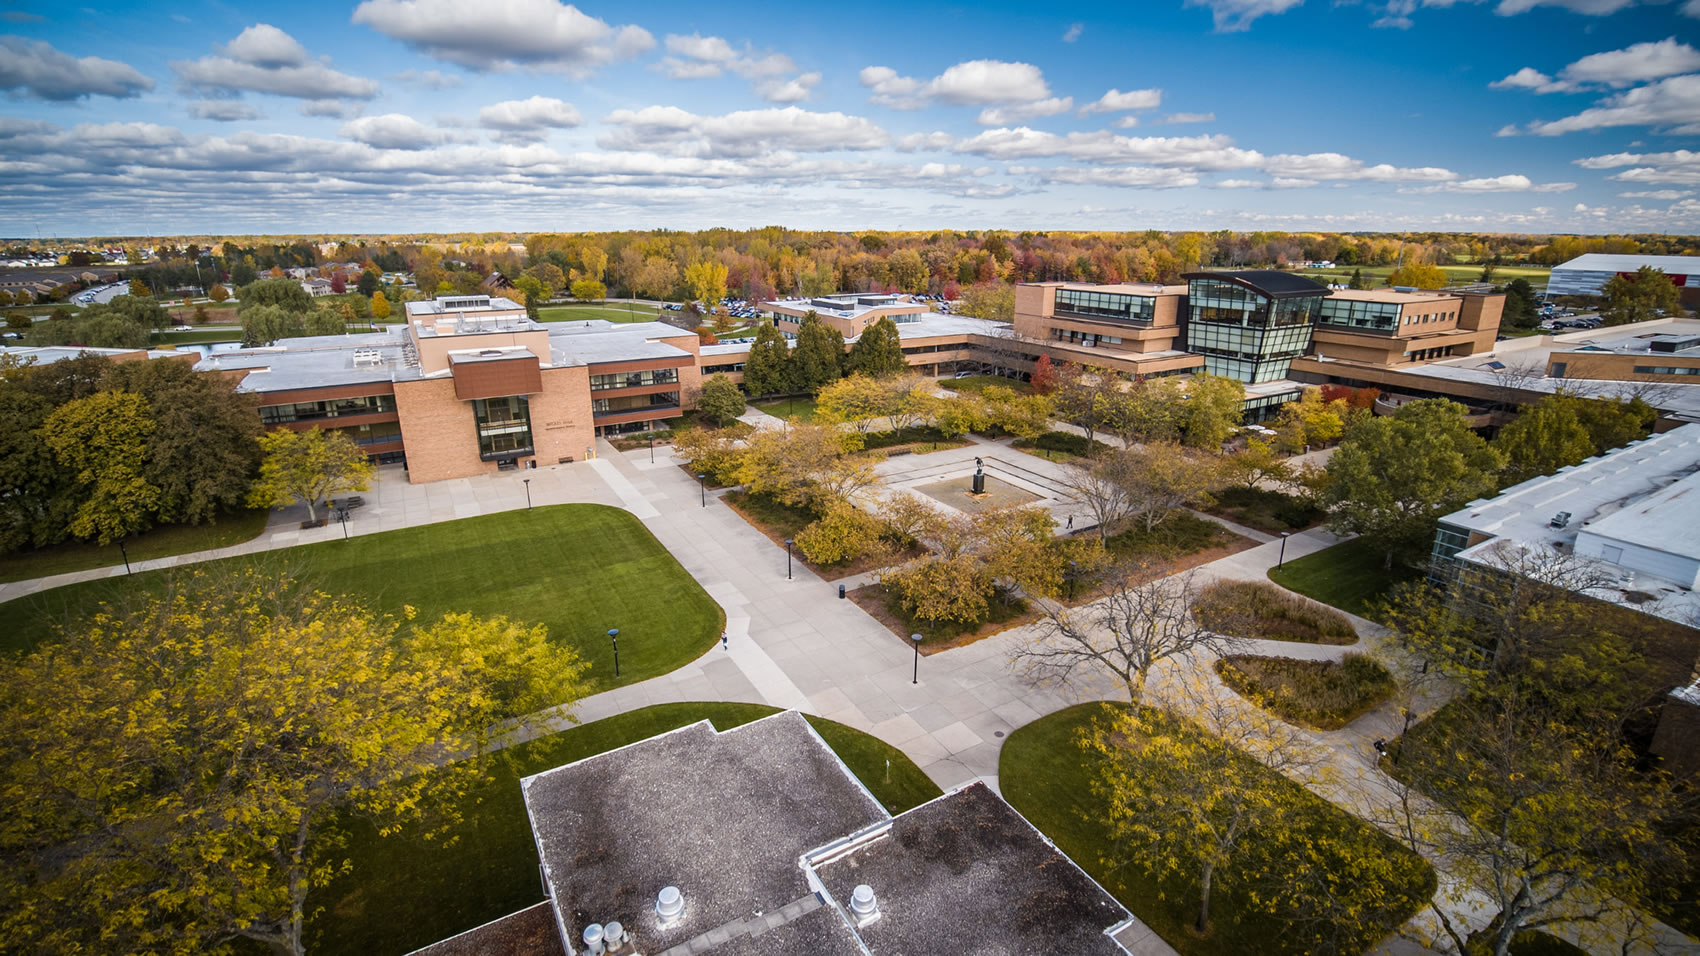 View of campus from drone